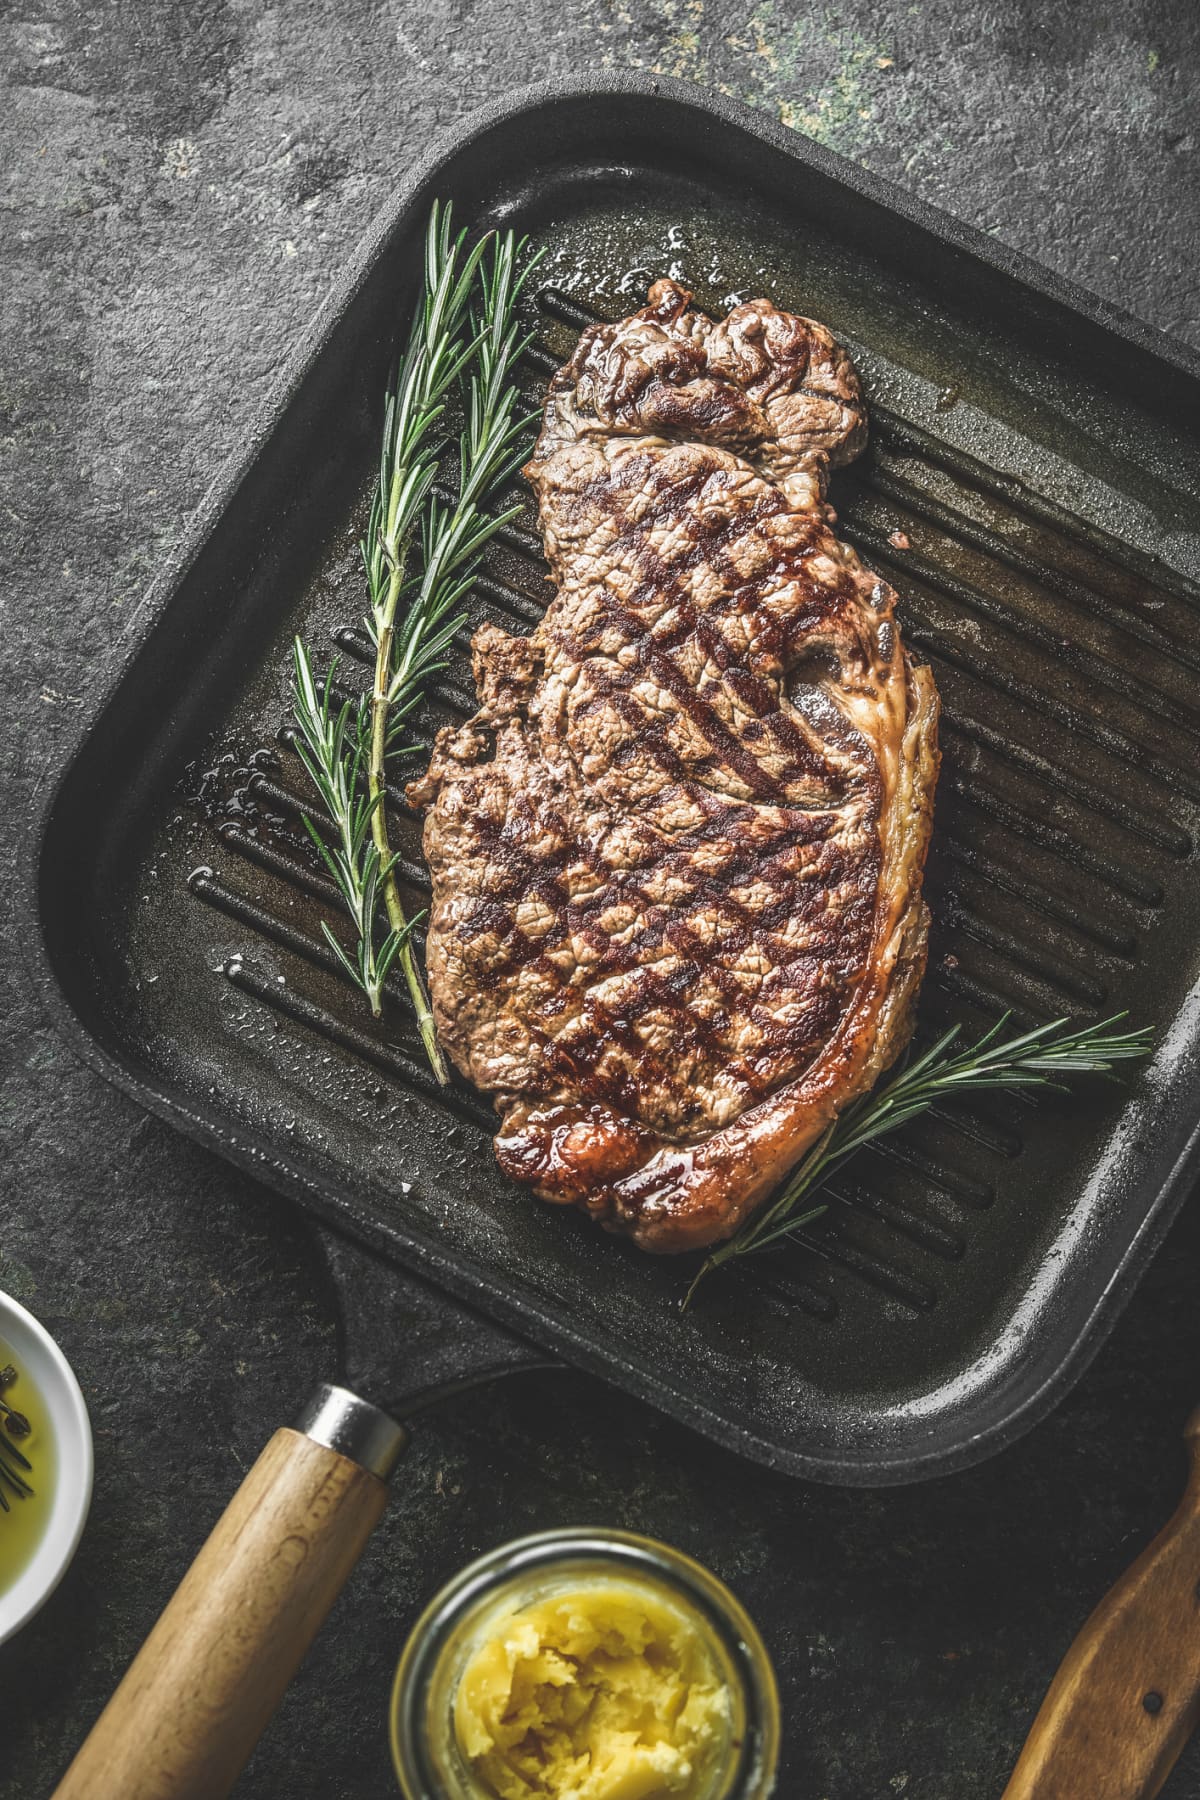 A large cooked ribeye steak in a grill pan next to a sprig of rosemary